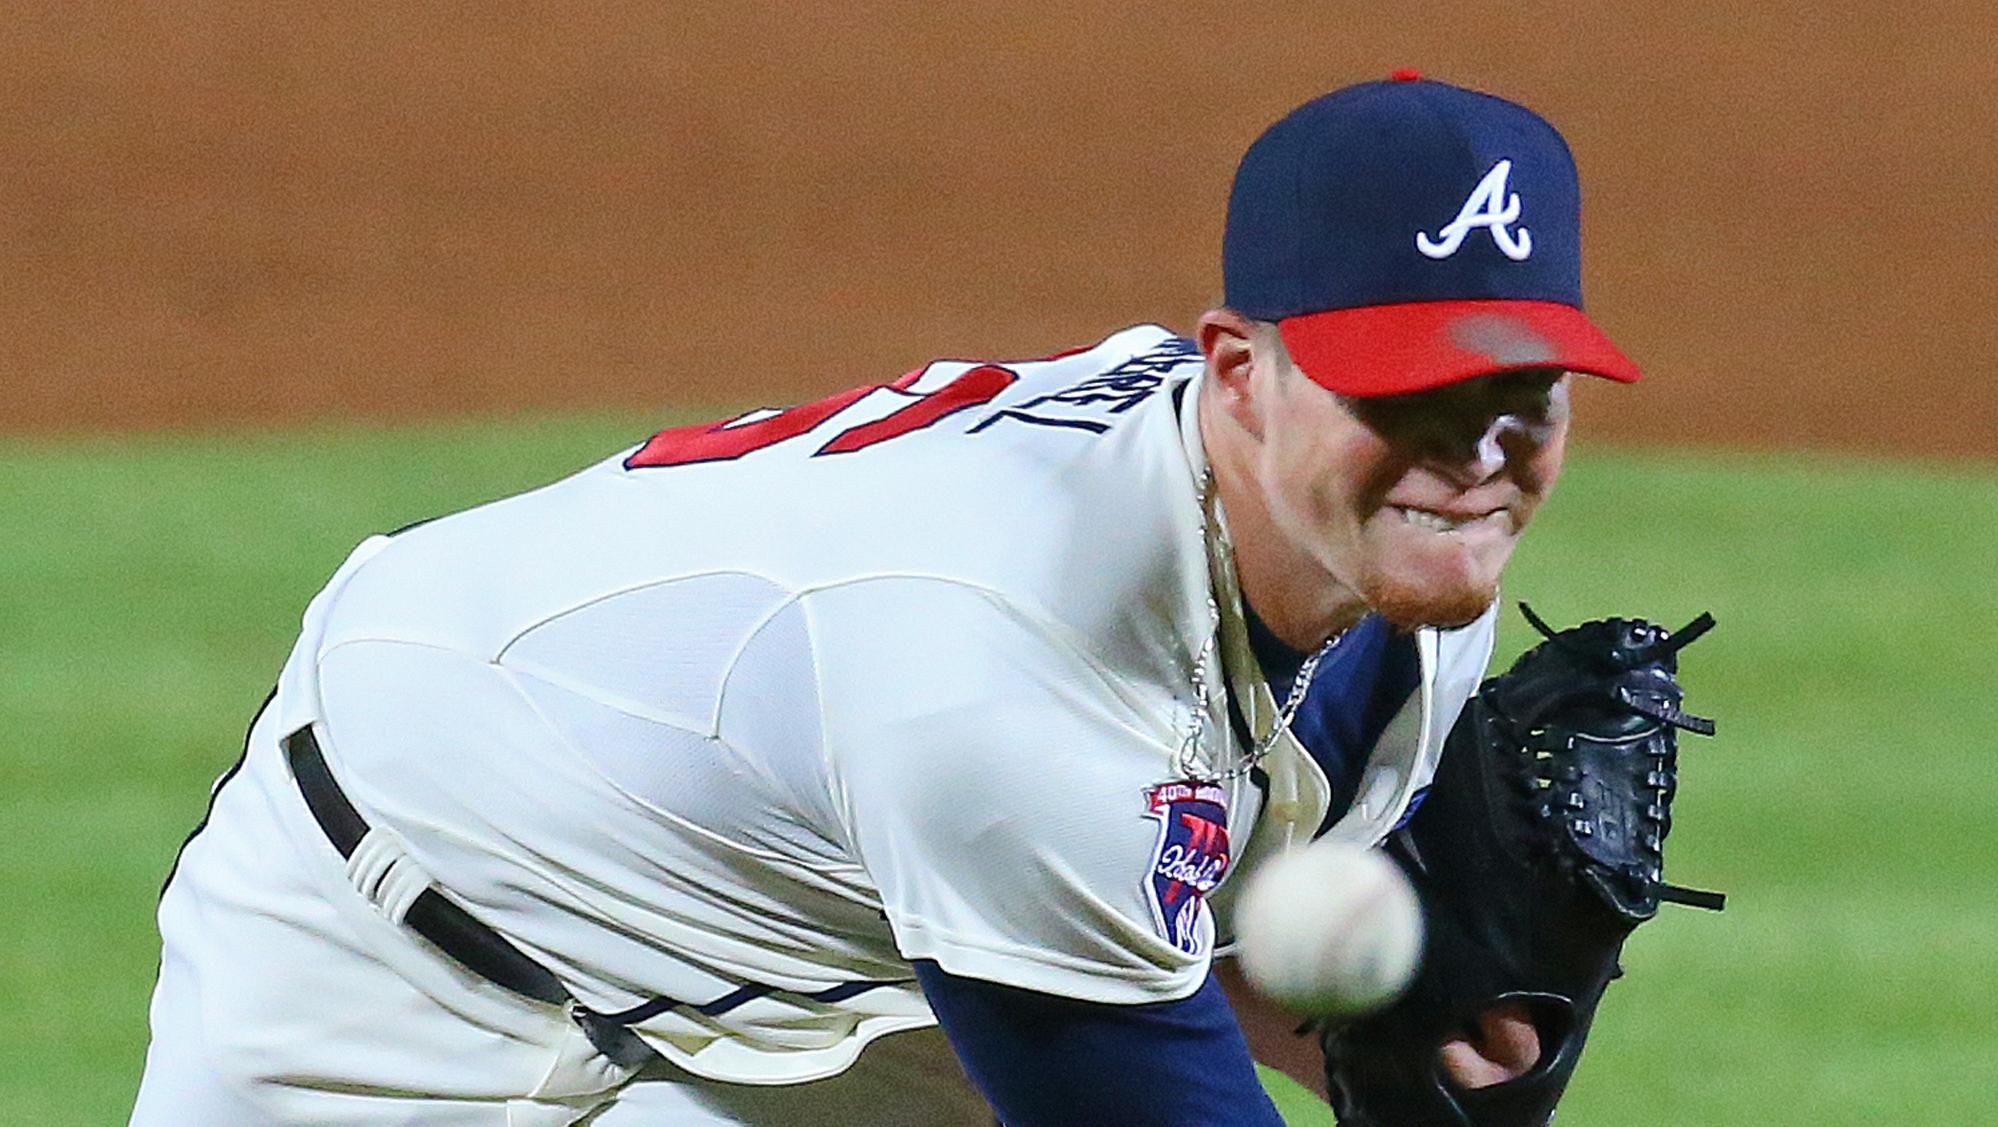 Craig Kimbrel, Boston Red Sox reliever, returning to Fort Myers as daughter  Lydia Joy has improved after surgery 